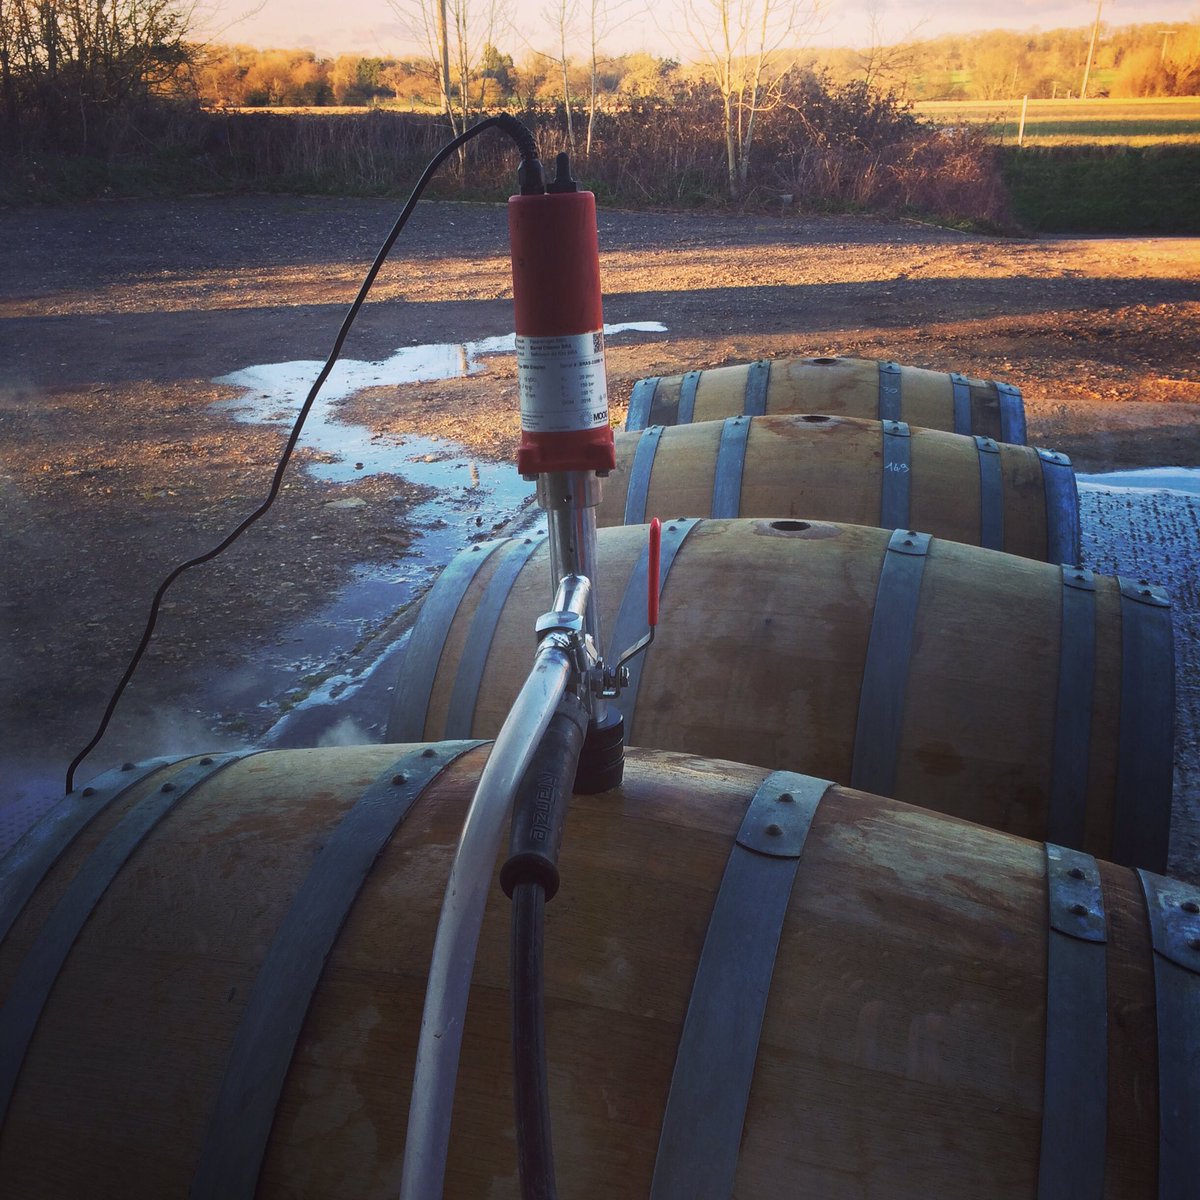 End of a long winery day washing barrels as the sun goes down. This time next week we'll be bottling!
#sunday #winerylife